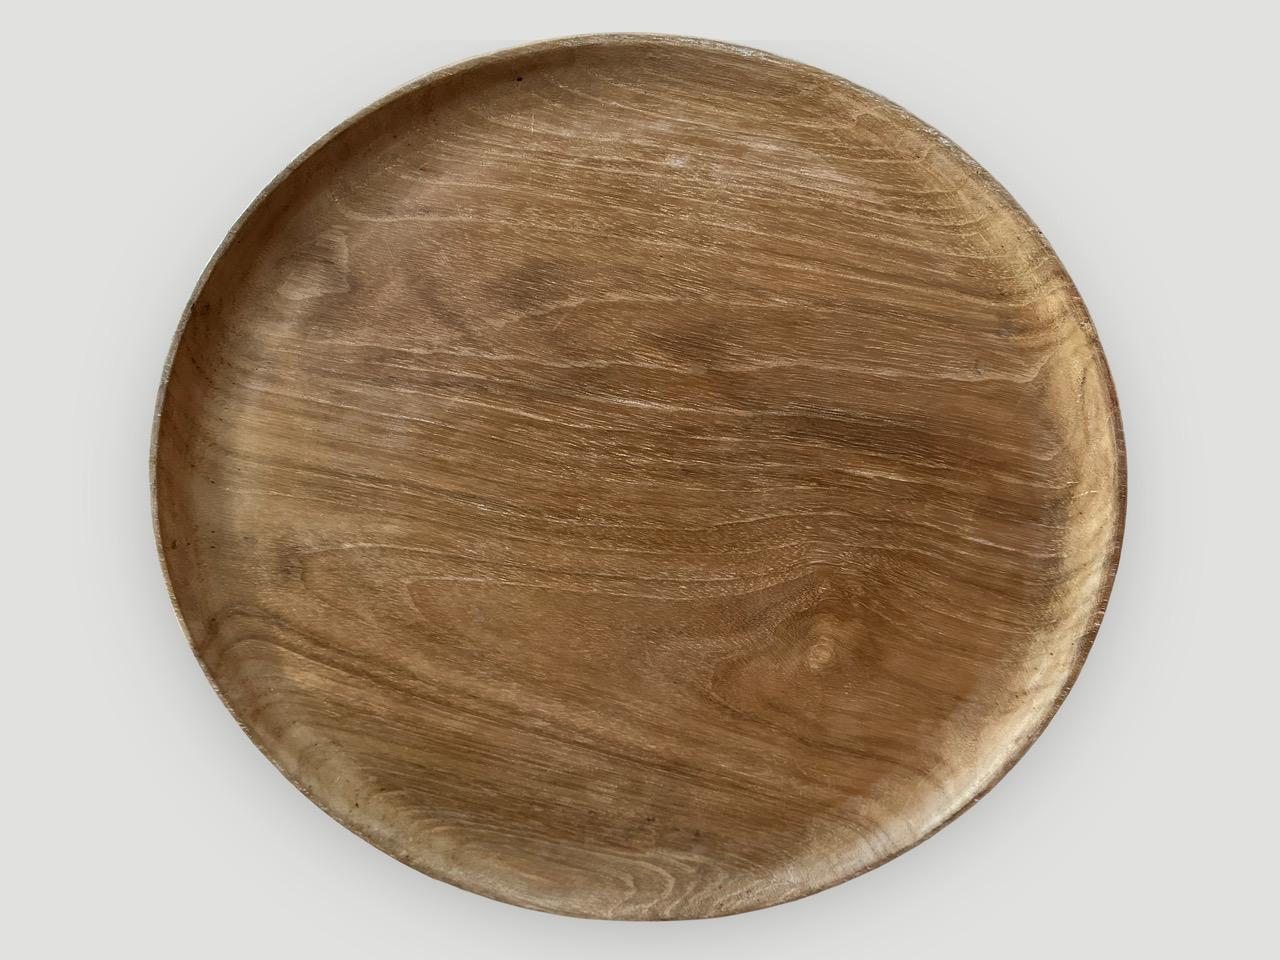 Andrianna Shamaris Minimalist Teak Wood Shallow Platter In Excellent Condition For Sale In New York, NY